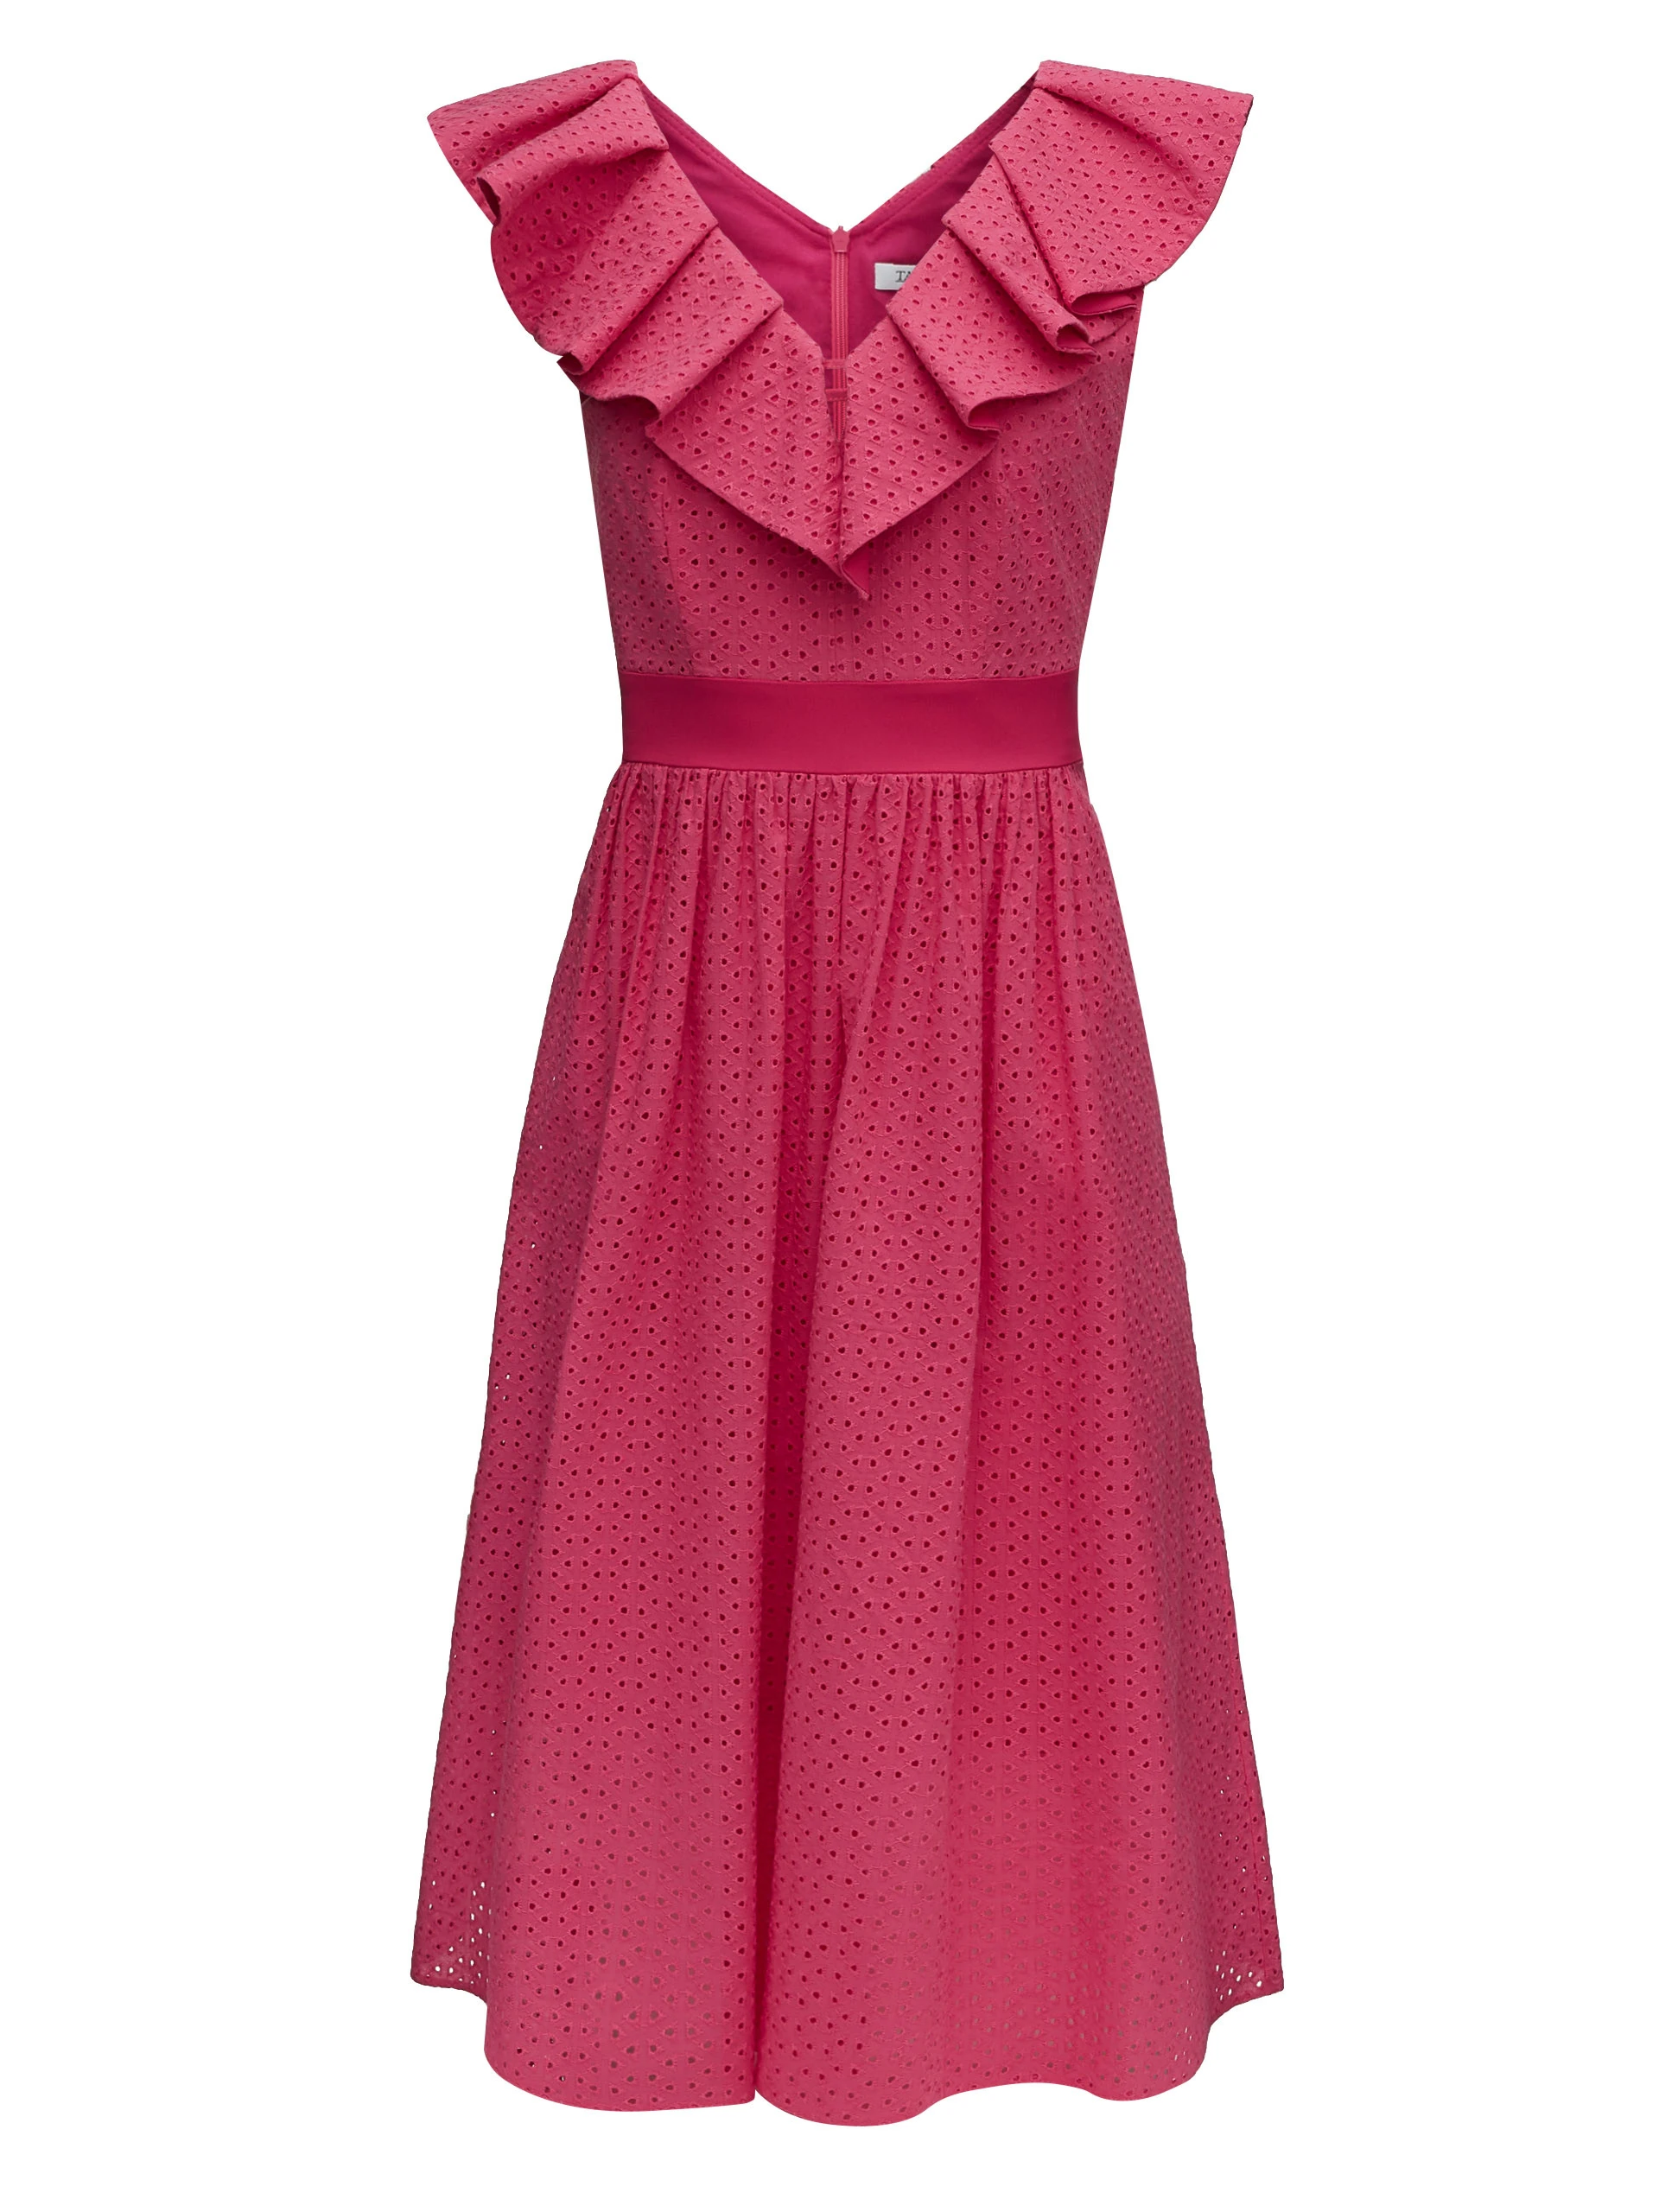 BLUSHED DRESS WITH RUFFLE AT NECKLINE